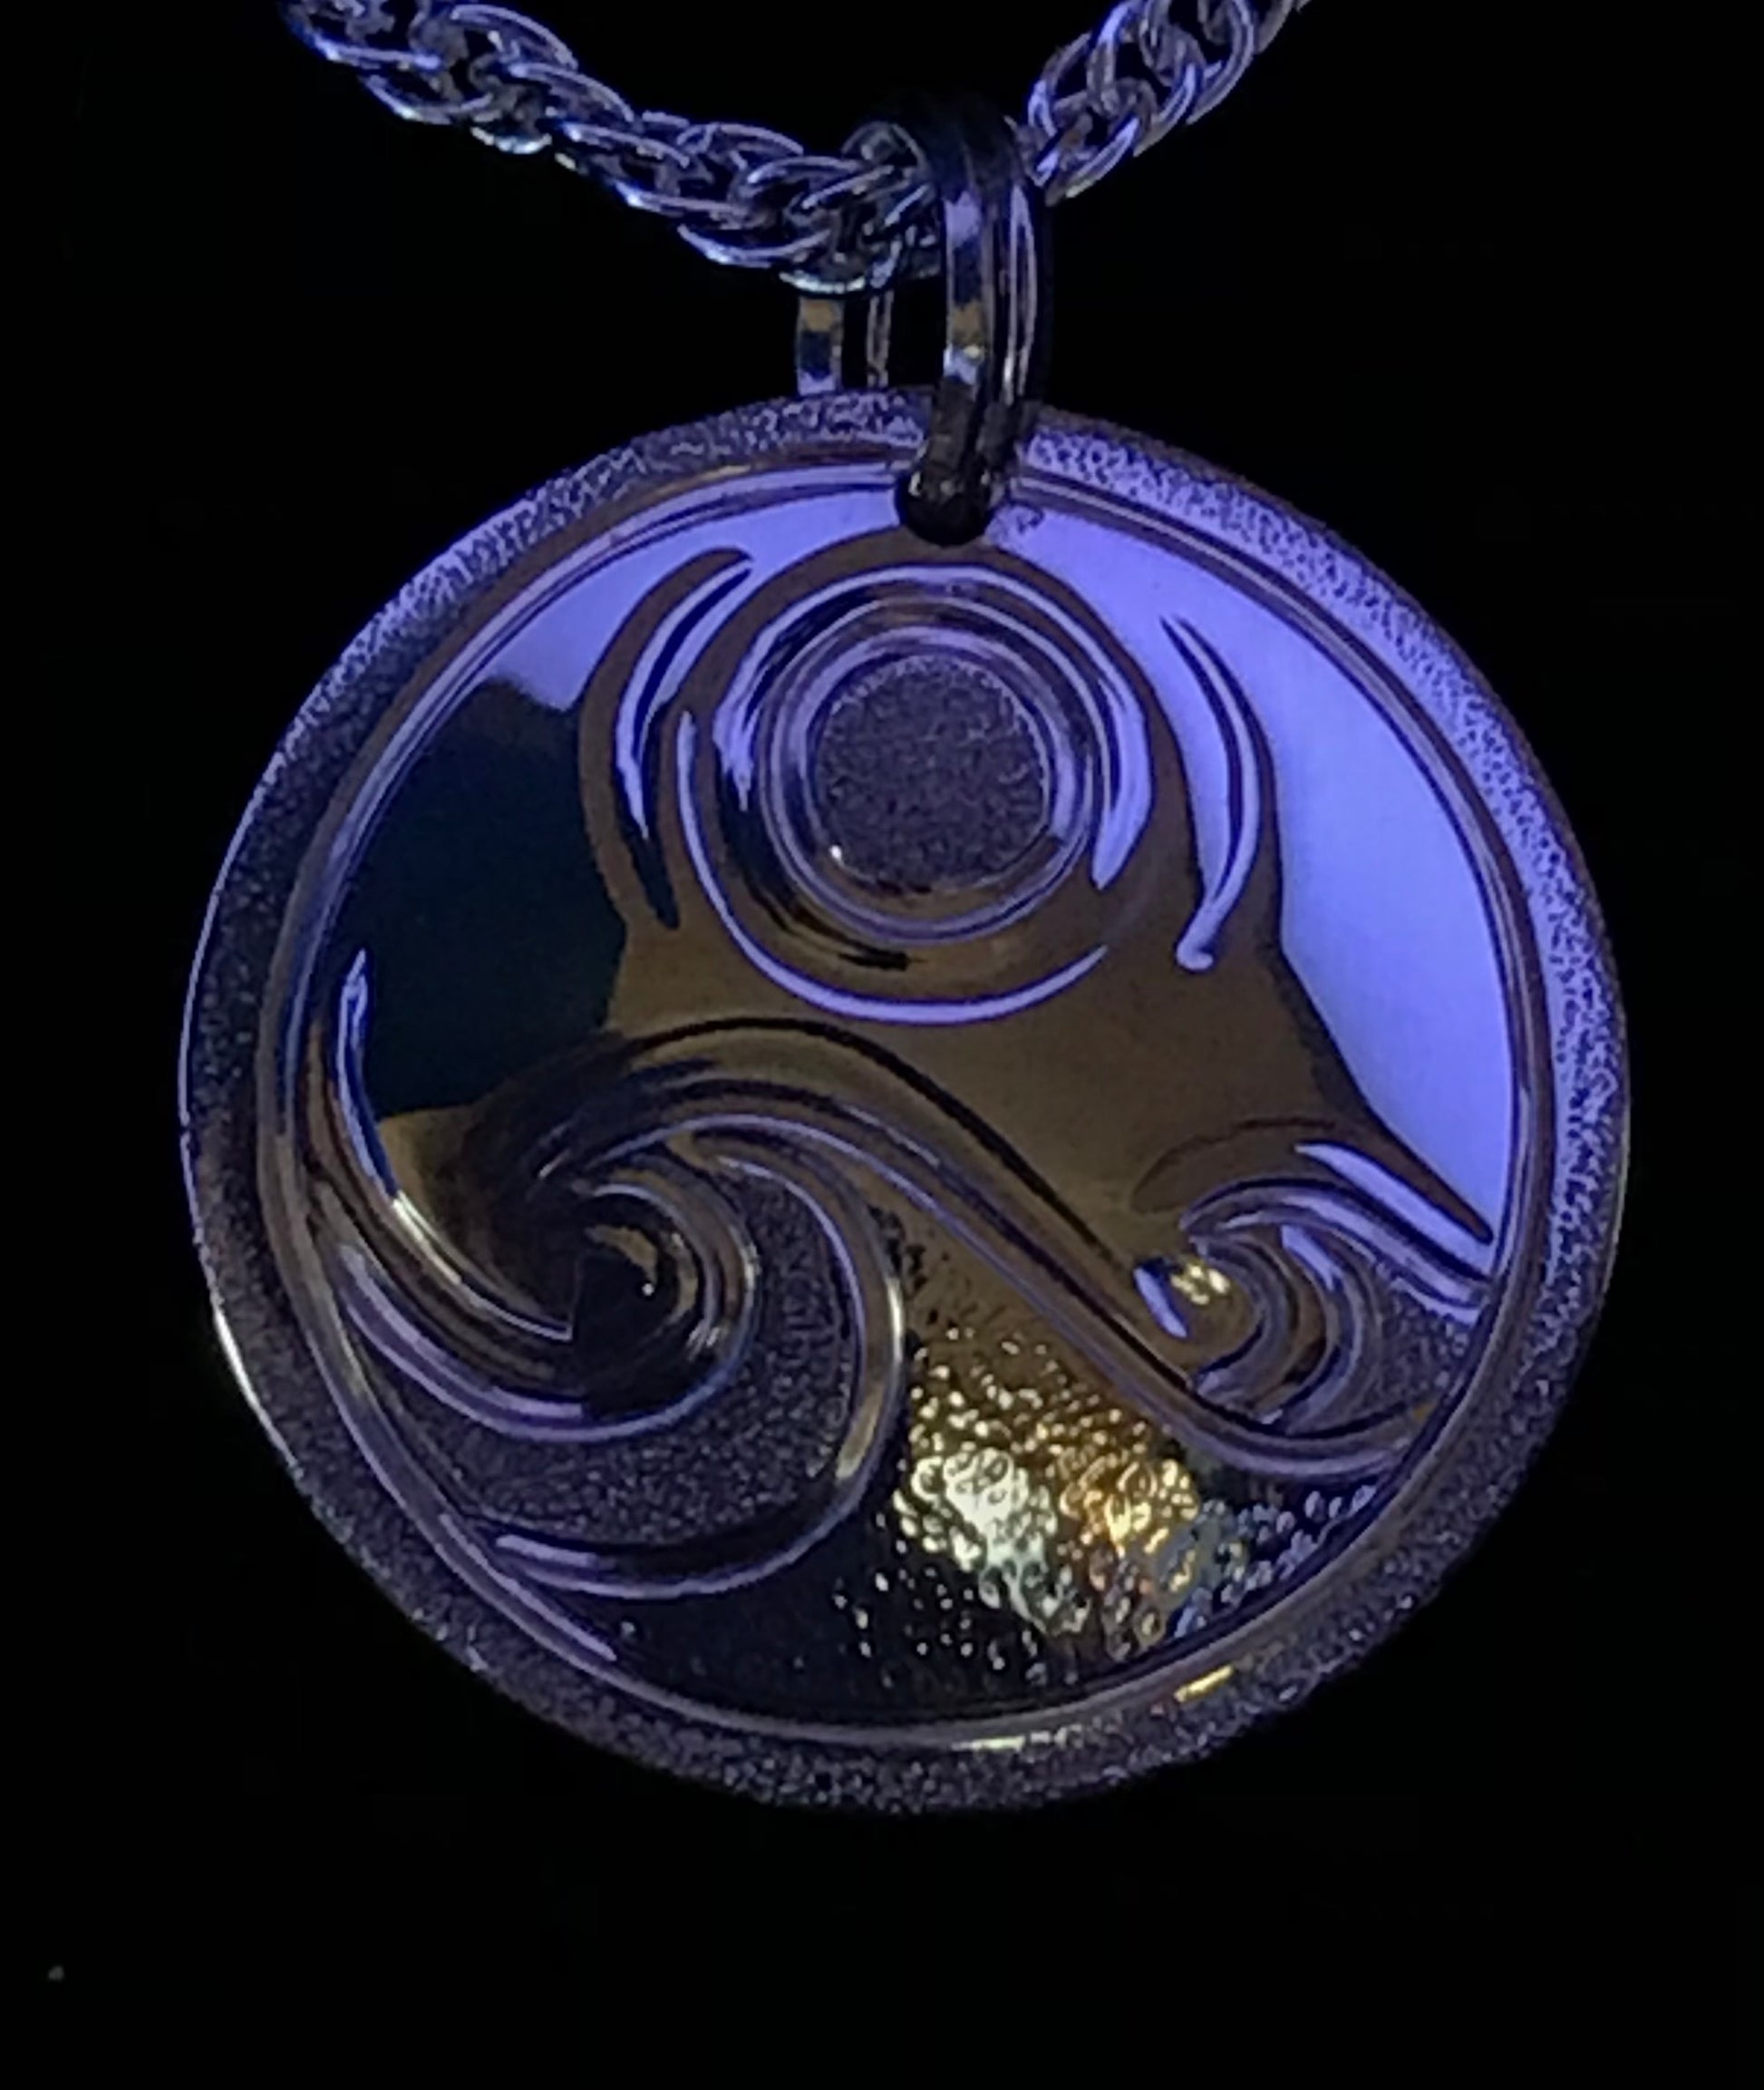  Waves & Full Moon sterling silver pendant designed and engraved by Laura Dutheil.